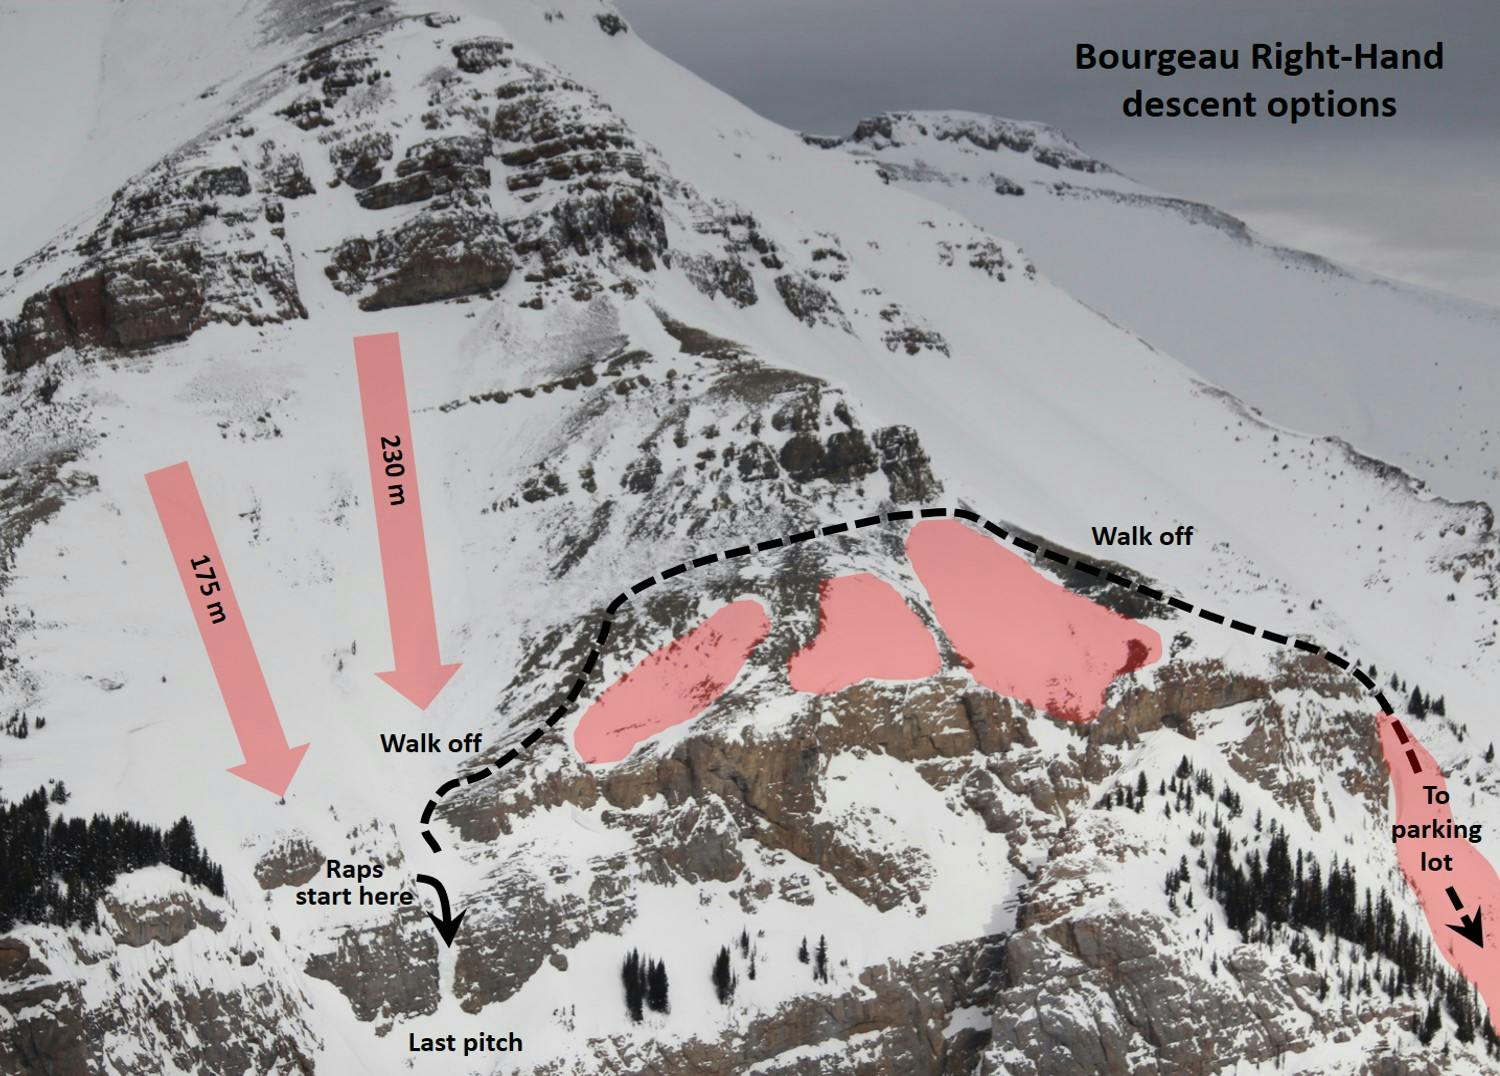 This image shows the two start zones on the Bourgeau Right climb. It also shows the walk off option that crosses the start zones and then heads to the right,.